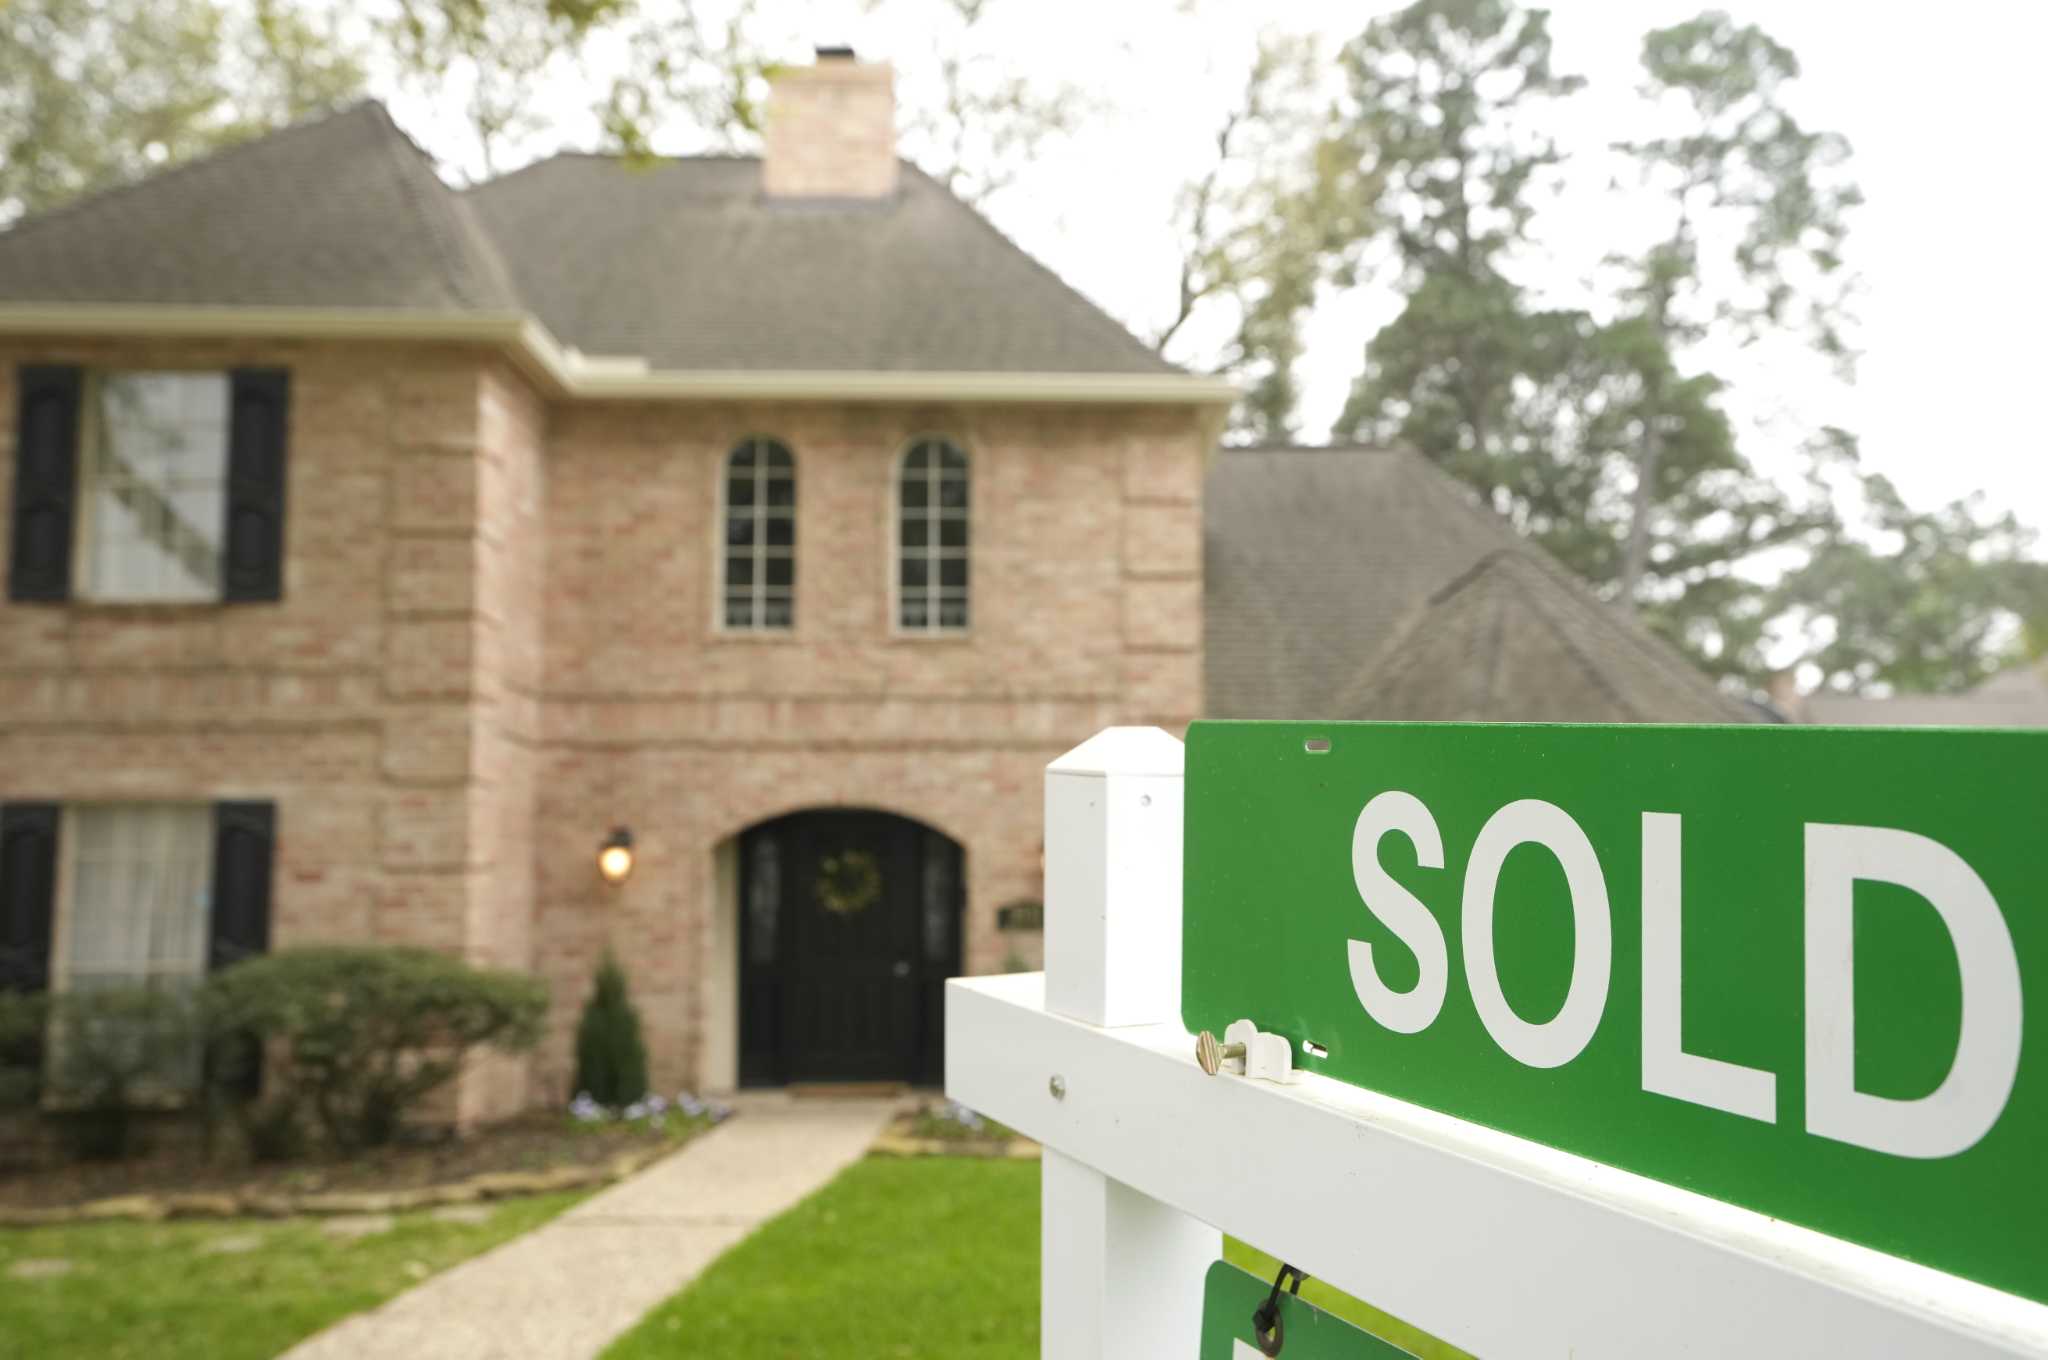 Home prices in Houston fell for the first time in nearly three years